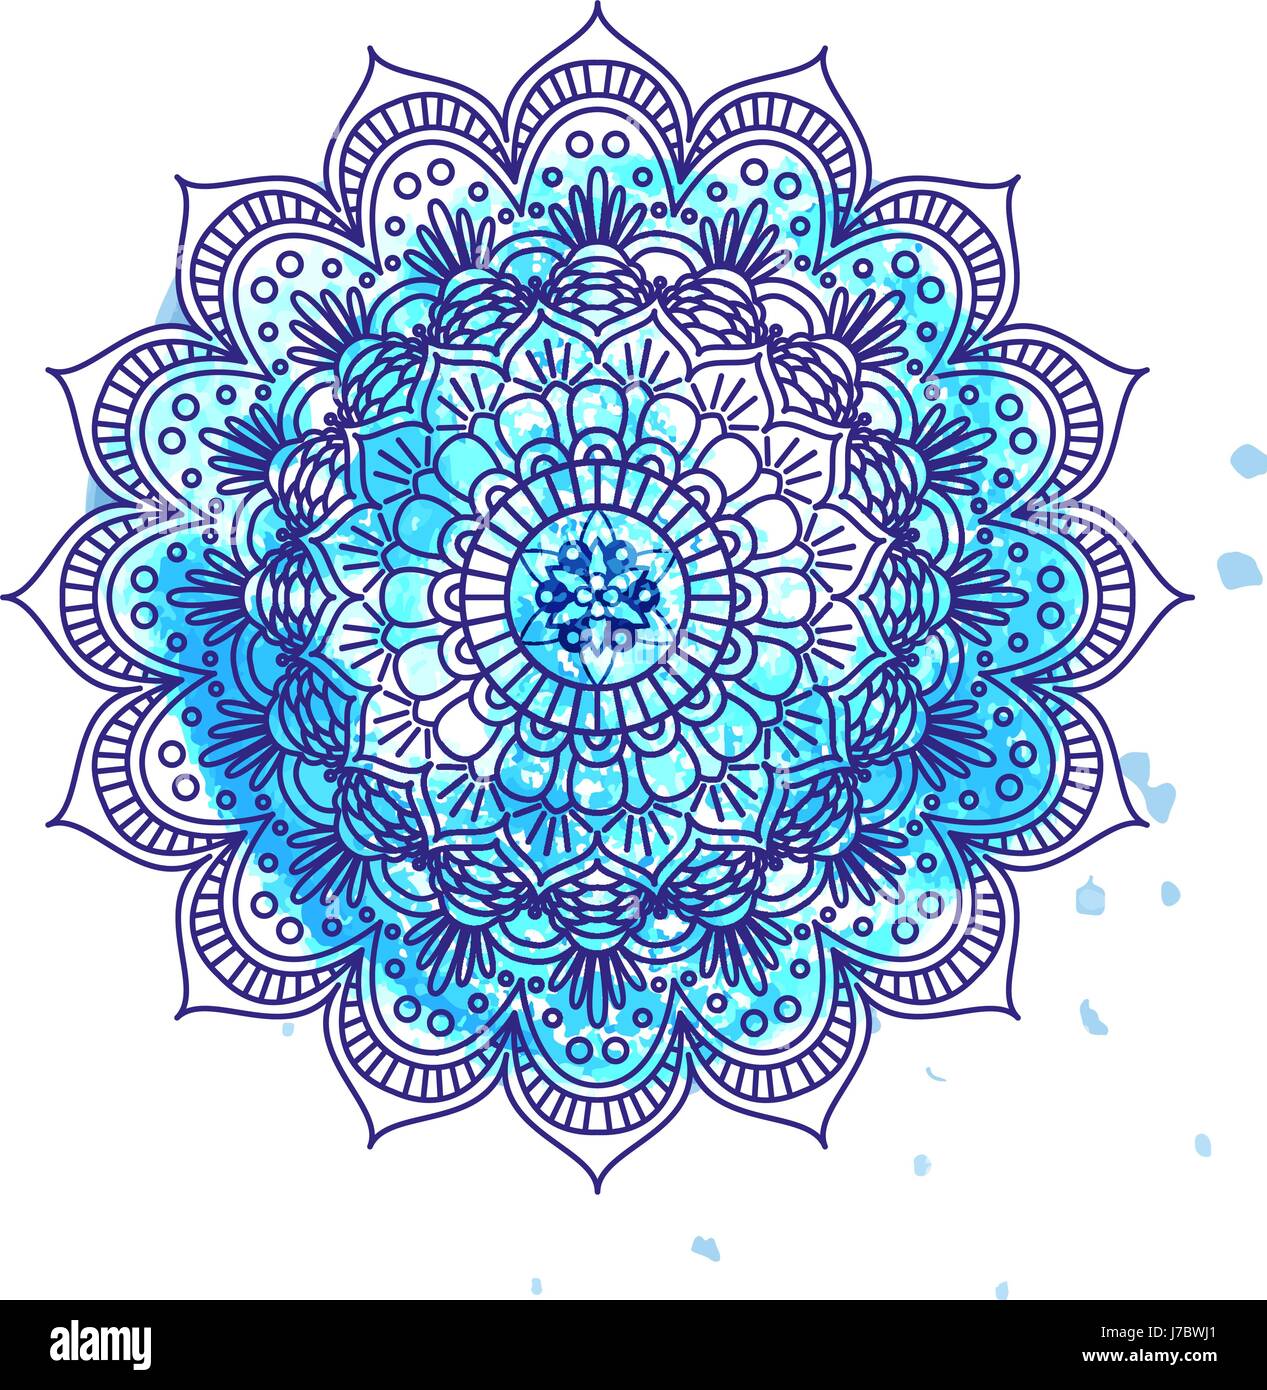 Mandala over colorful watercolor. Invitation, t-shirt print, wedding card. Decorative arabic round lace ornate . Vintage vector pattern for  or web design. abstract  background. Stock Vector